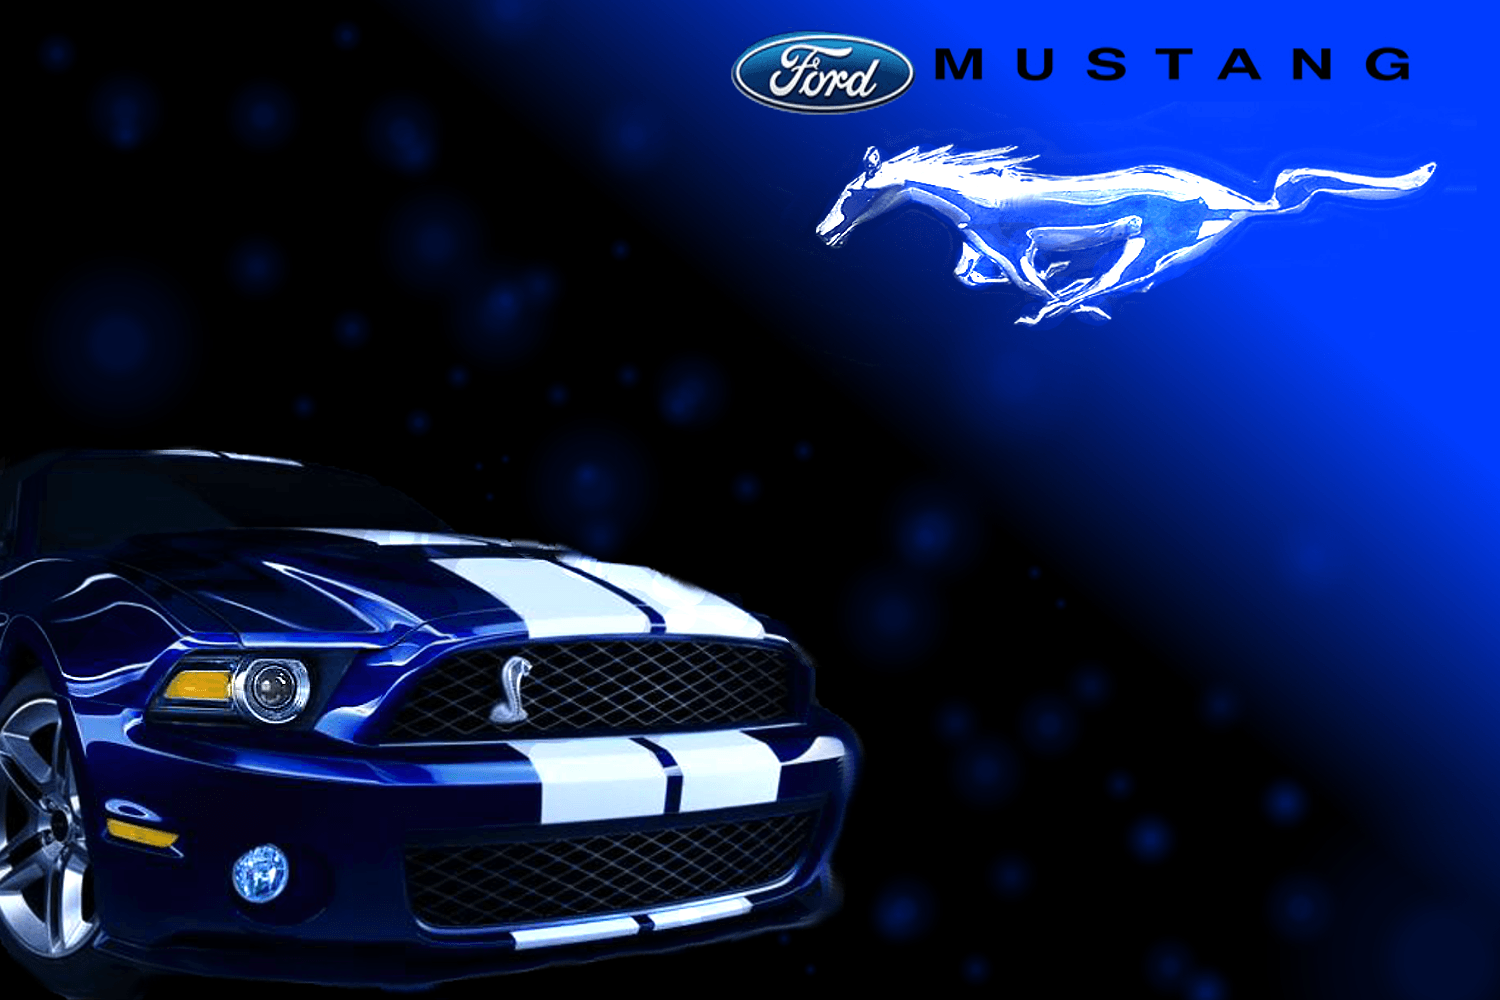 Ford Mustang Logo Wallpaper. Top Ford Mustang Logo Wallpaper With